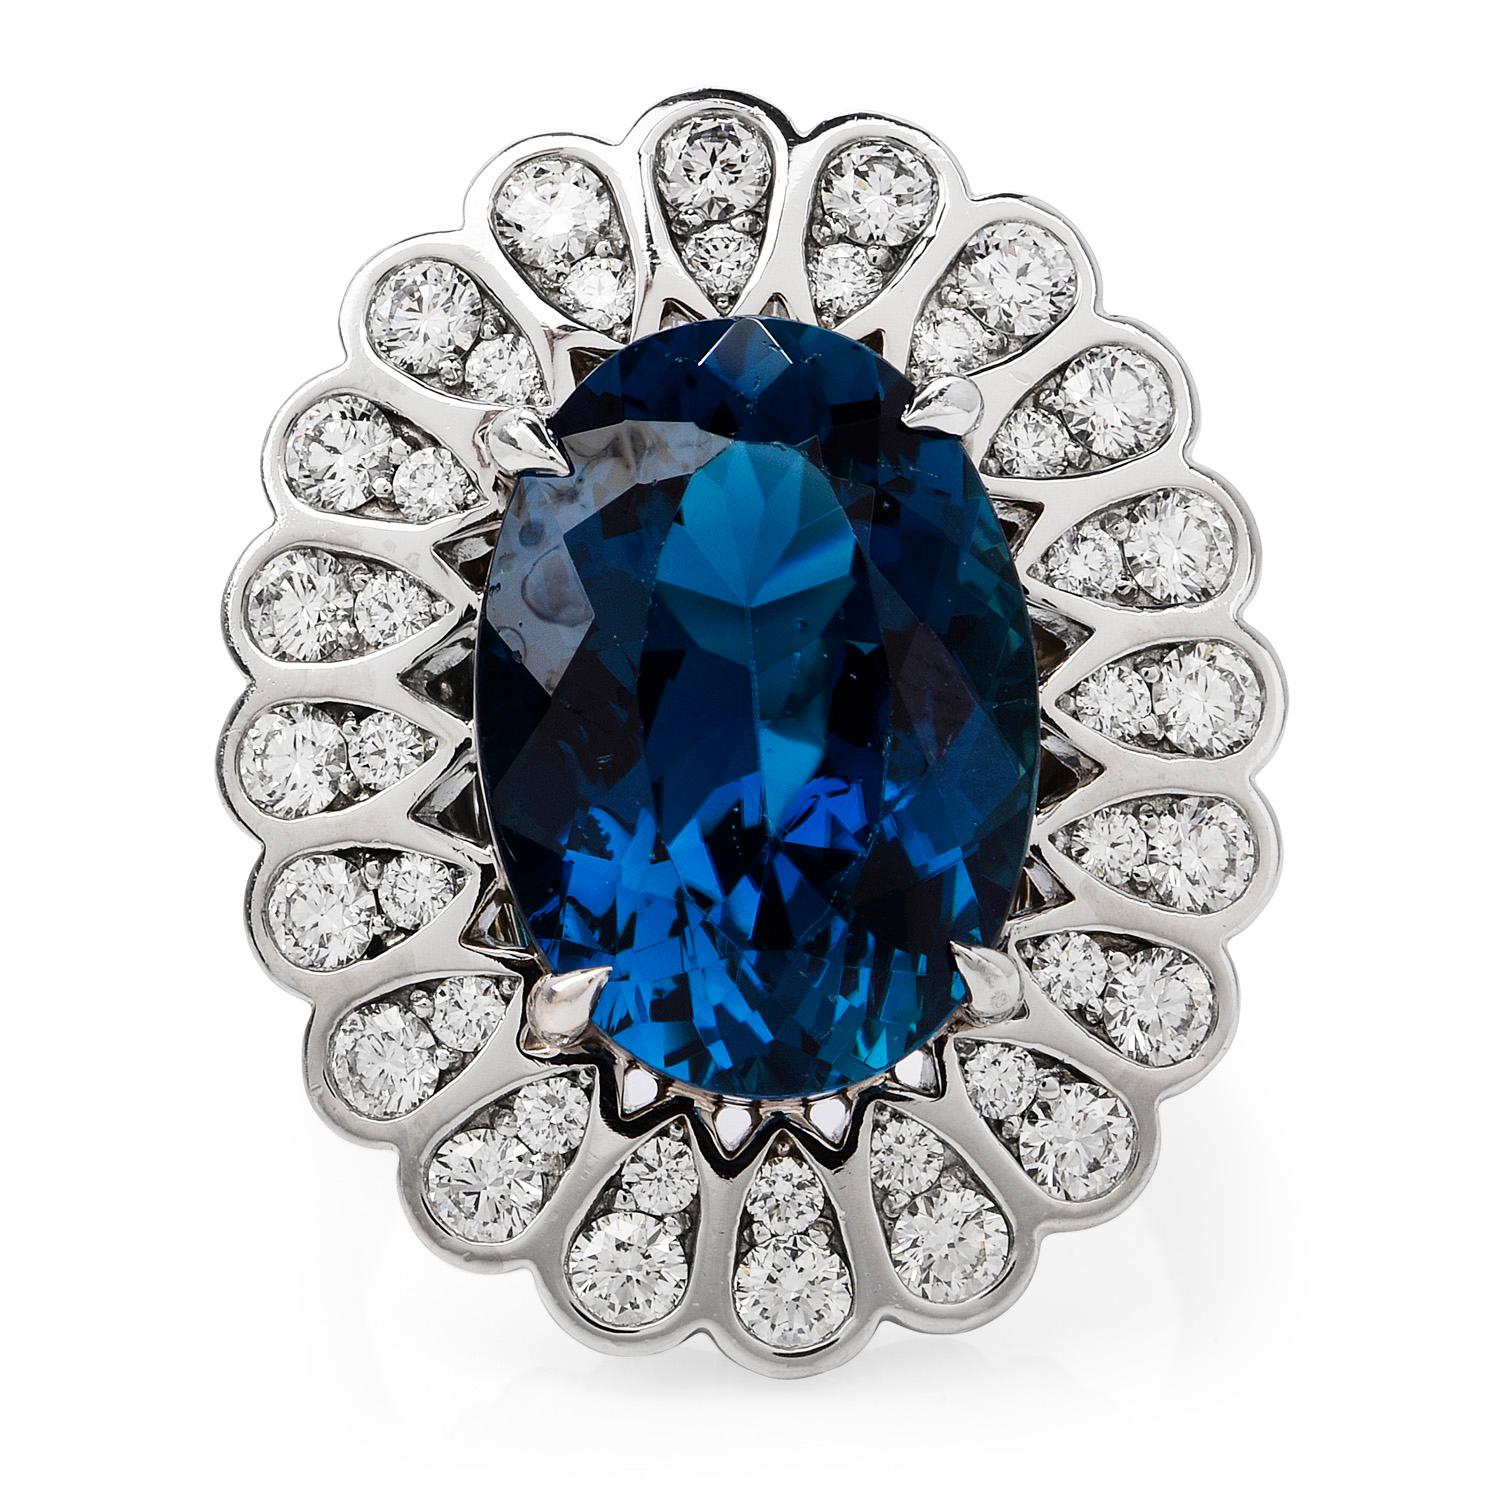 Tiffany & Co GIA Blue Tourmaline Platinum Designer Cocktail Ring

This rare Azure Blue,  Tiffany & Co GIA Tourmaline Platinum Designer Cocktail Ring will captivate everyone's attention! Weighing 16.9 grams.

The stunning center is exquisite GIA